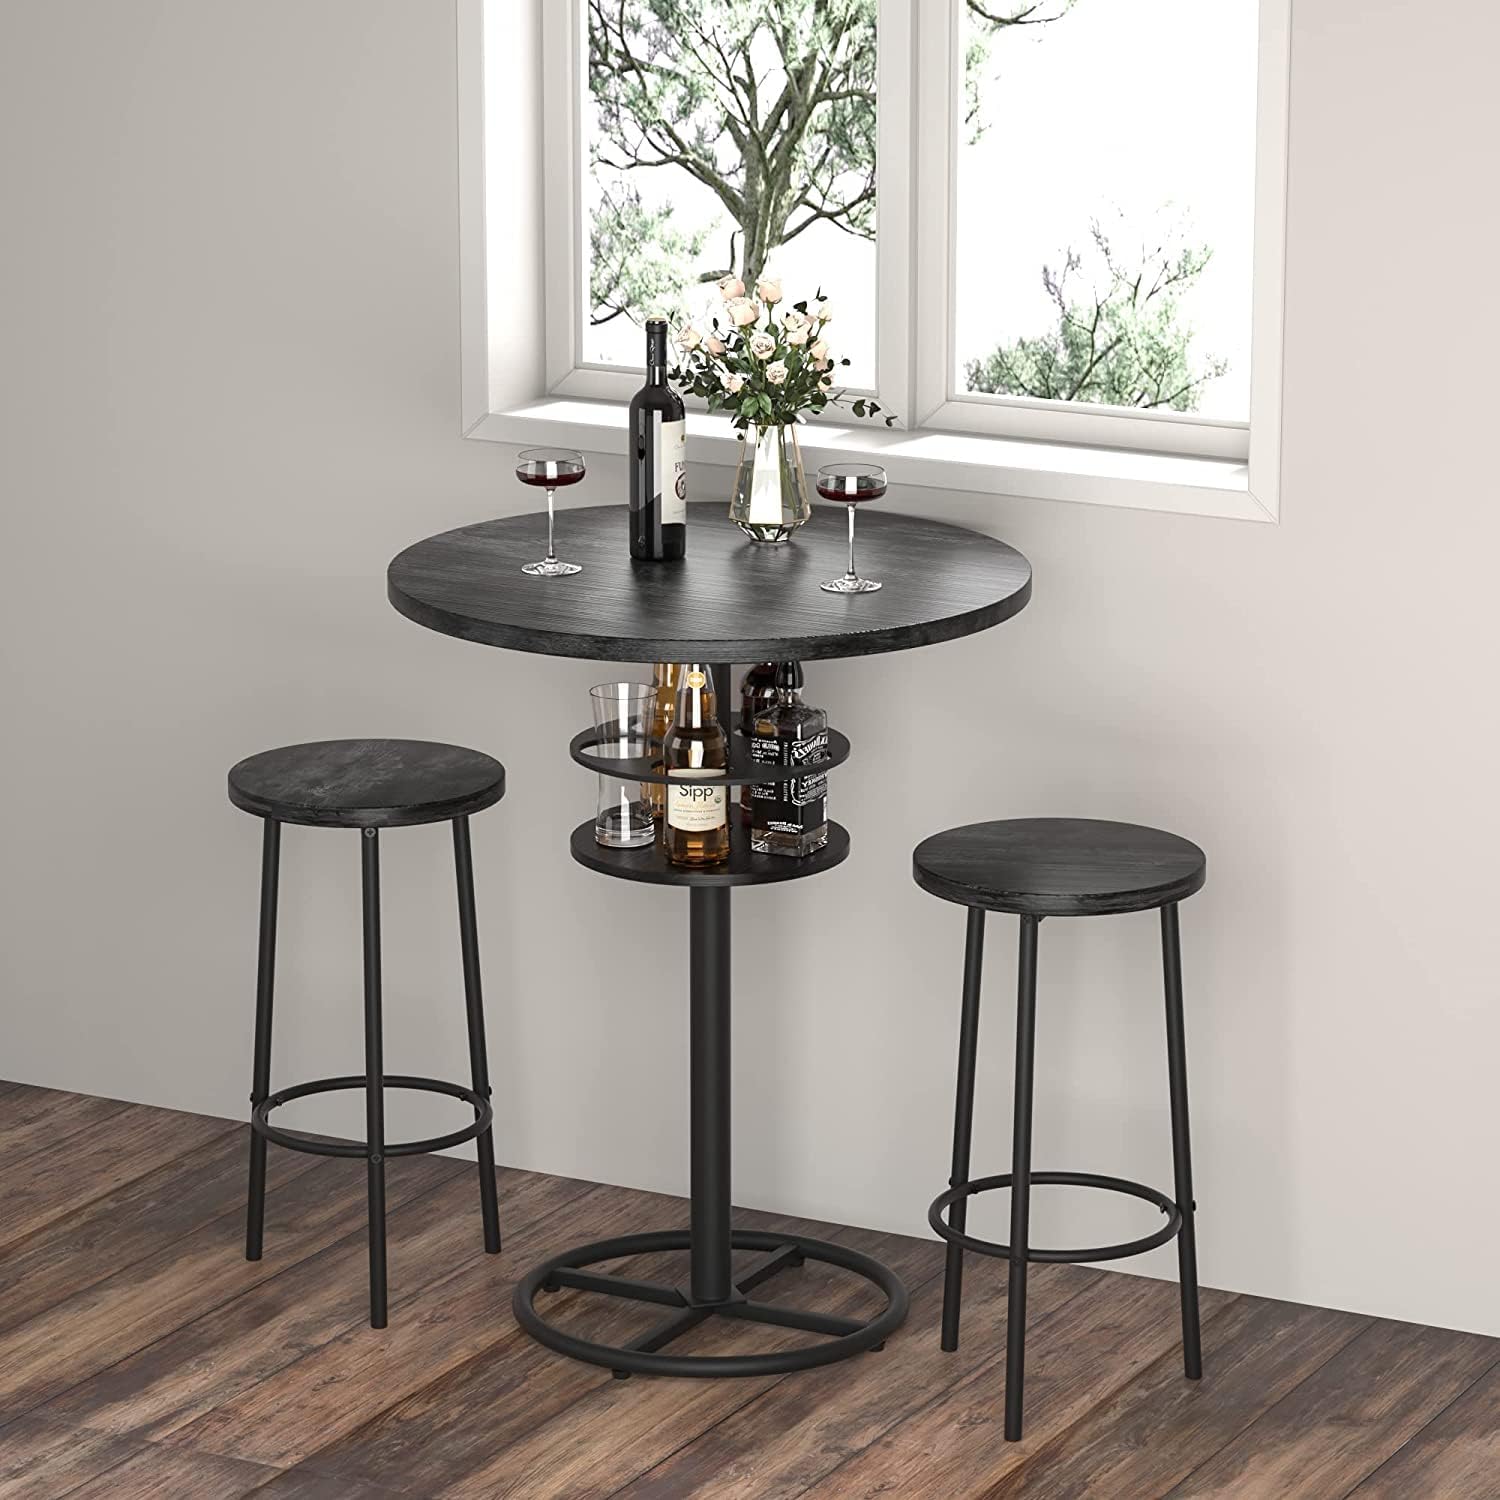 VECELO 3 Piece Bar Dining Set, Small 2-Tier Round Pub Table with Barstools, Kitchen Counter Height Wood Top Bistro for Breakfast Nook